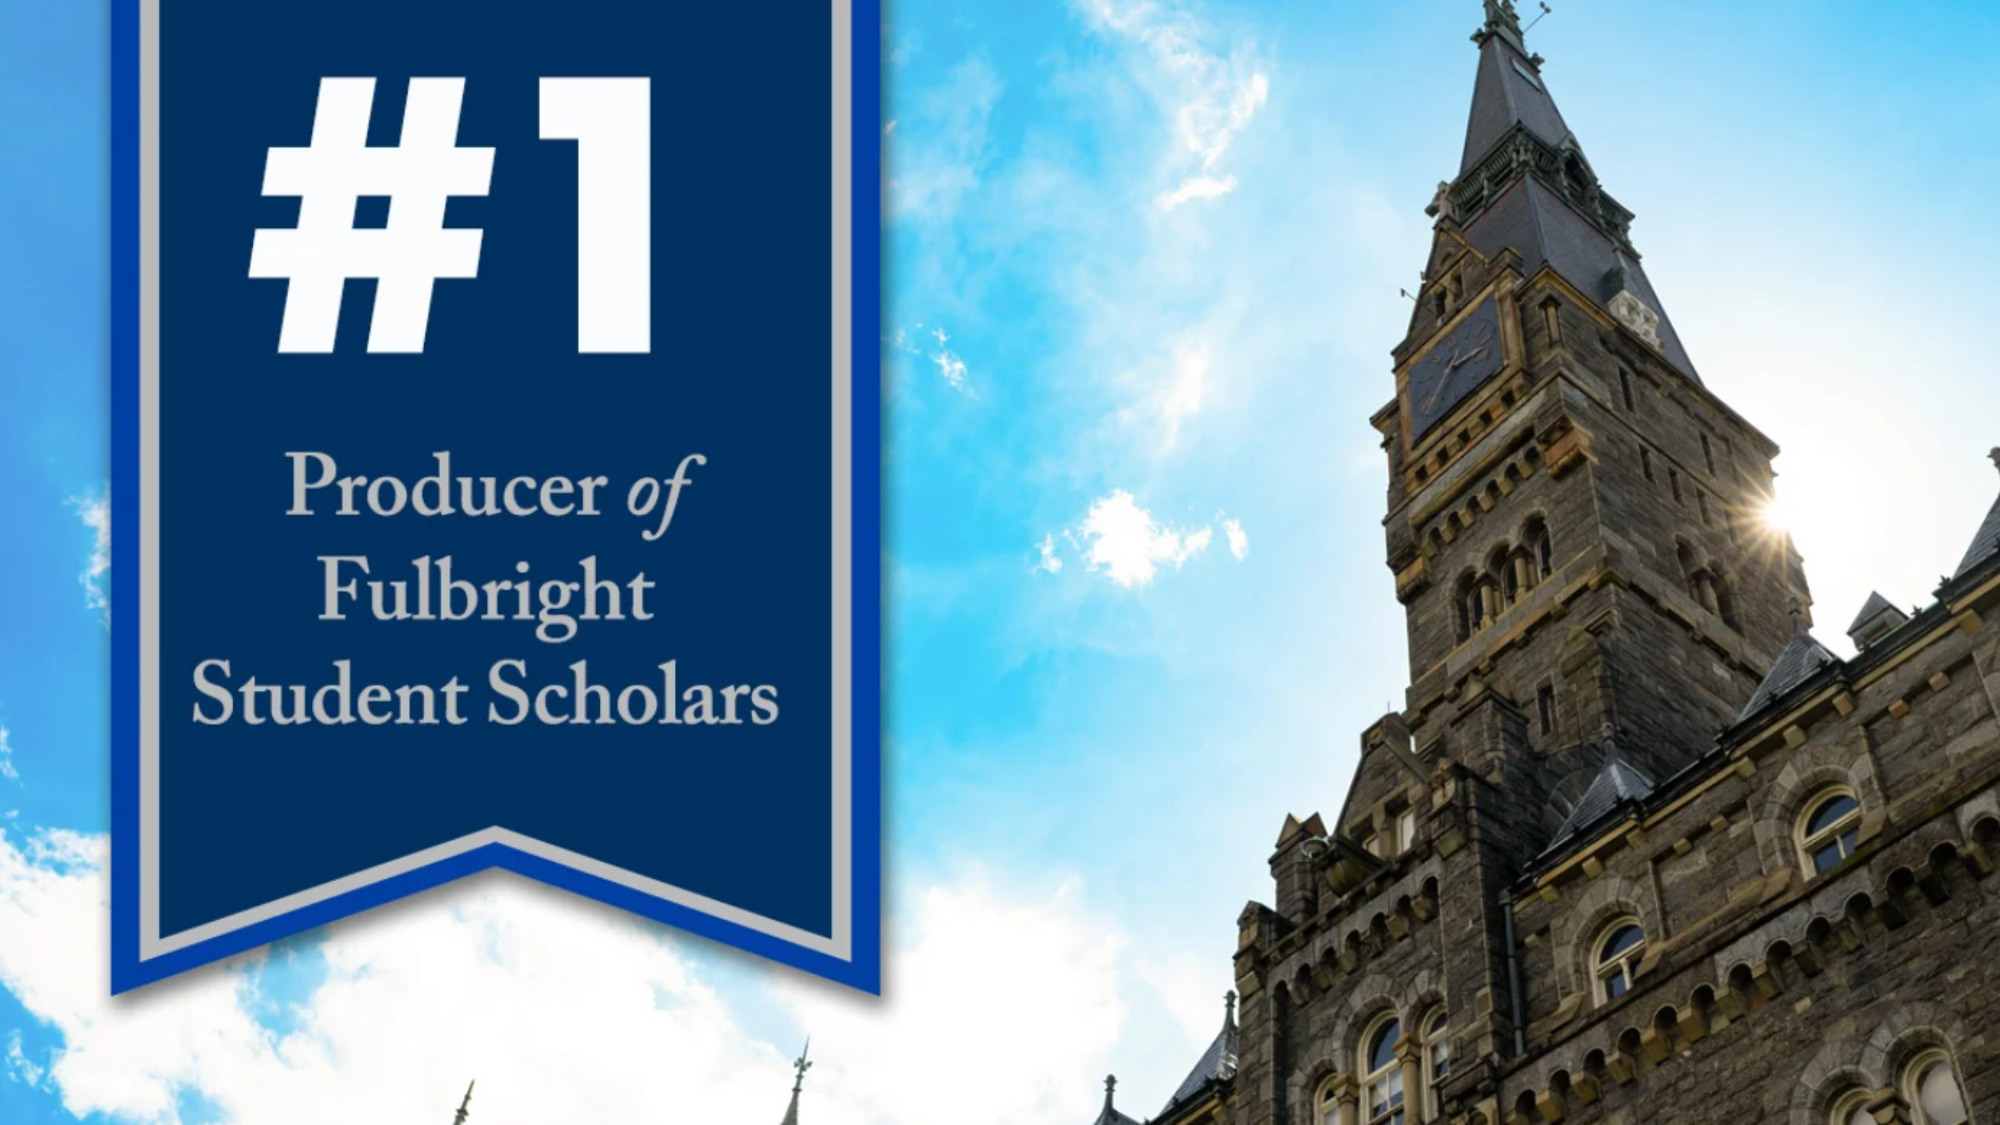 Georgetown University is a #1 producer of Fulbright Student Scholars